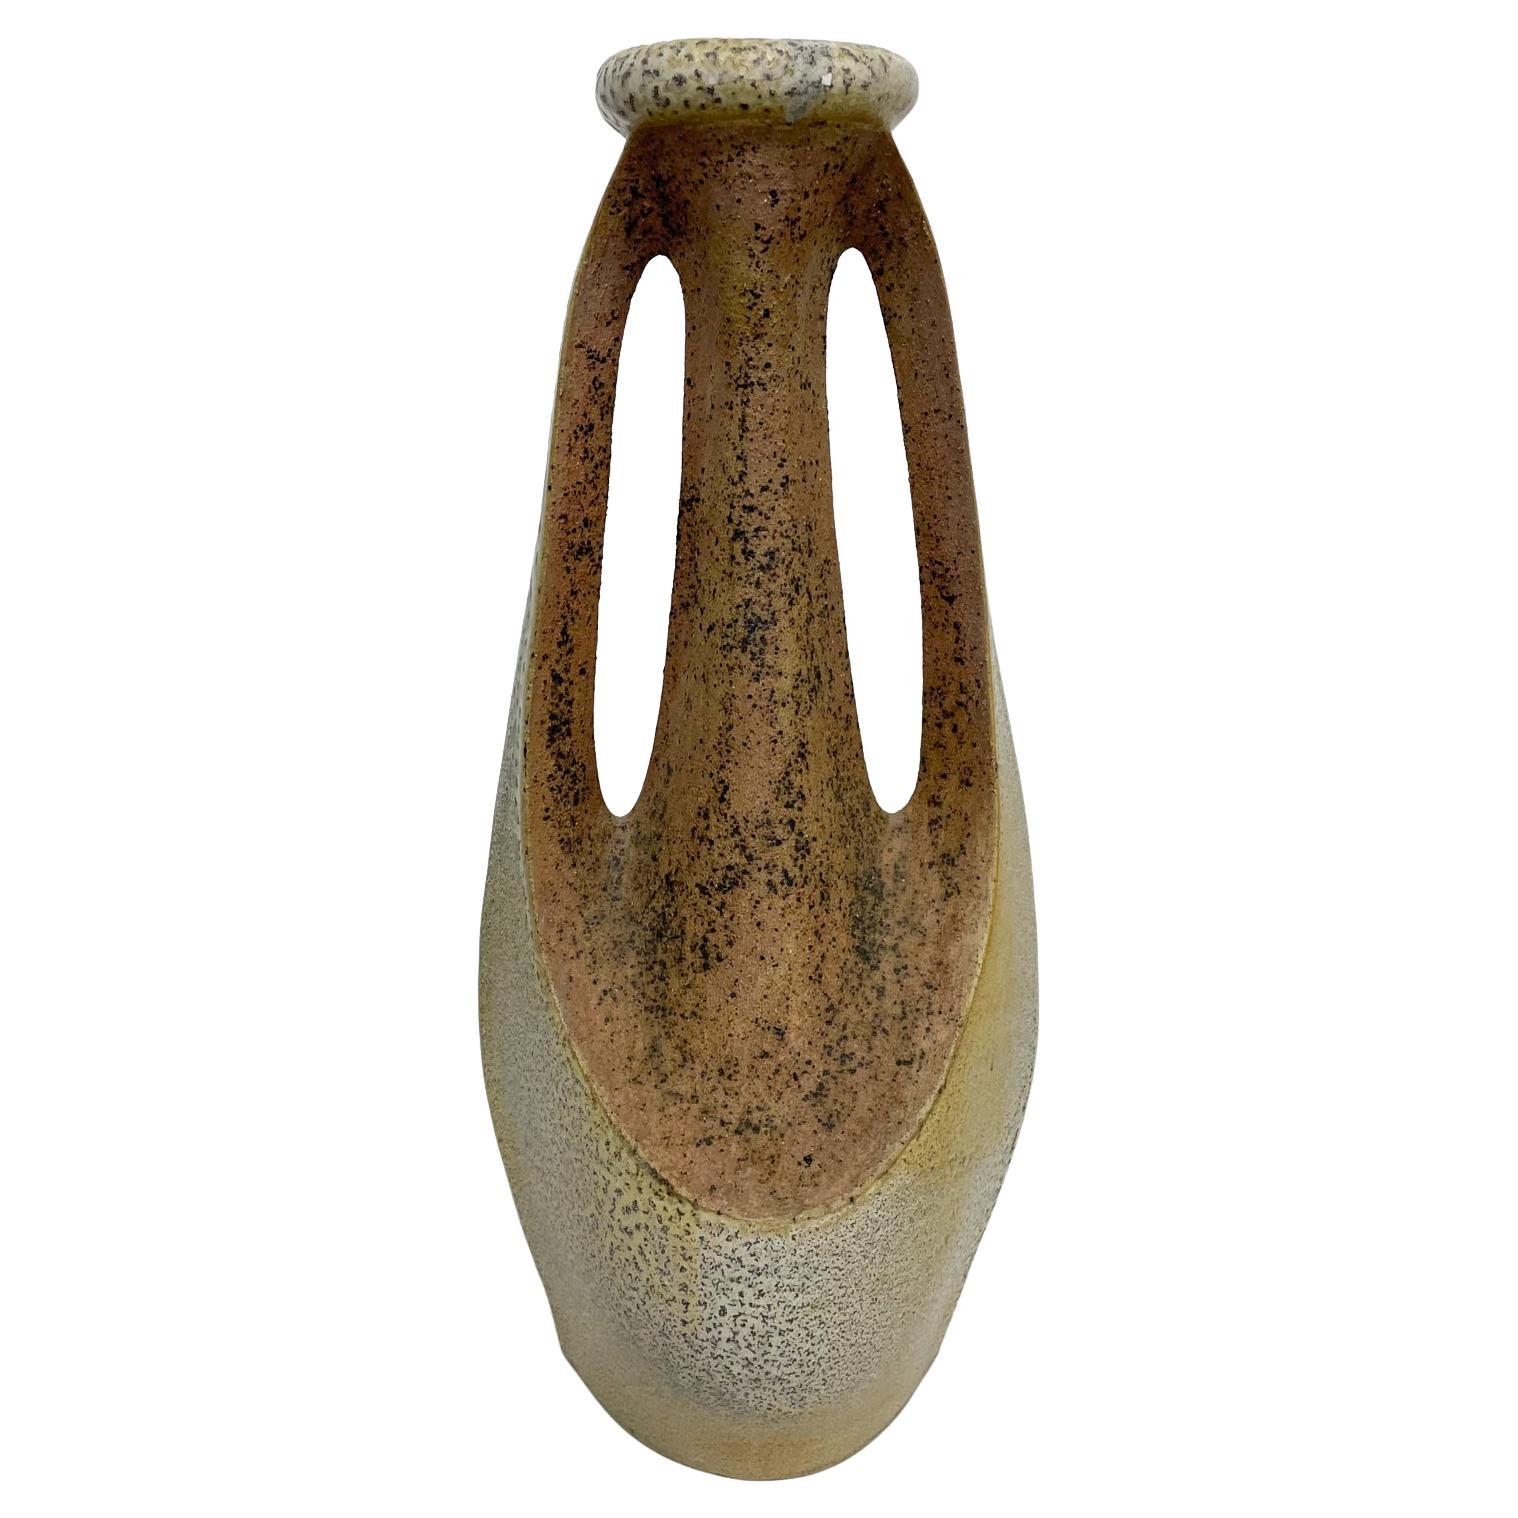 Speckled Pottery Sculptural Modernist Vase by Chico Ribeiro Munoz Brazil For Sale